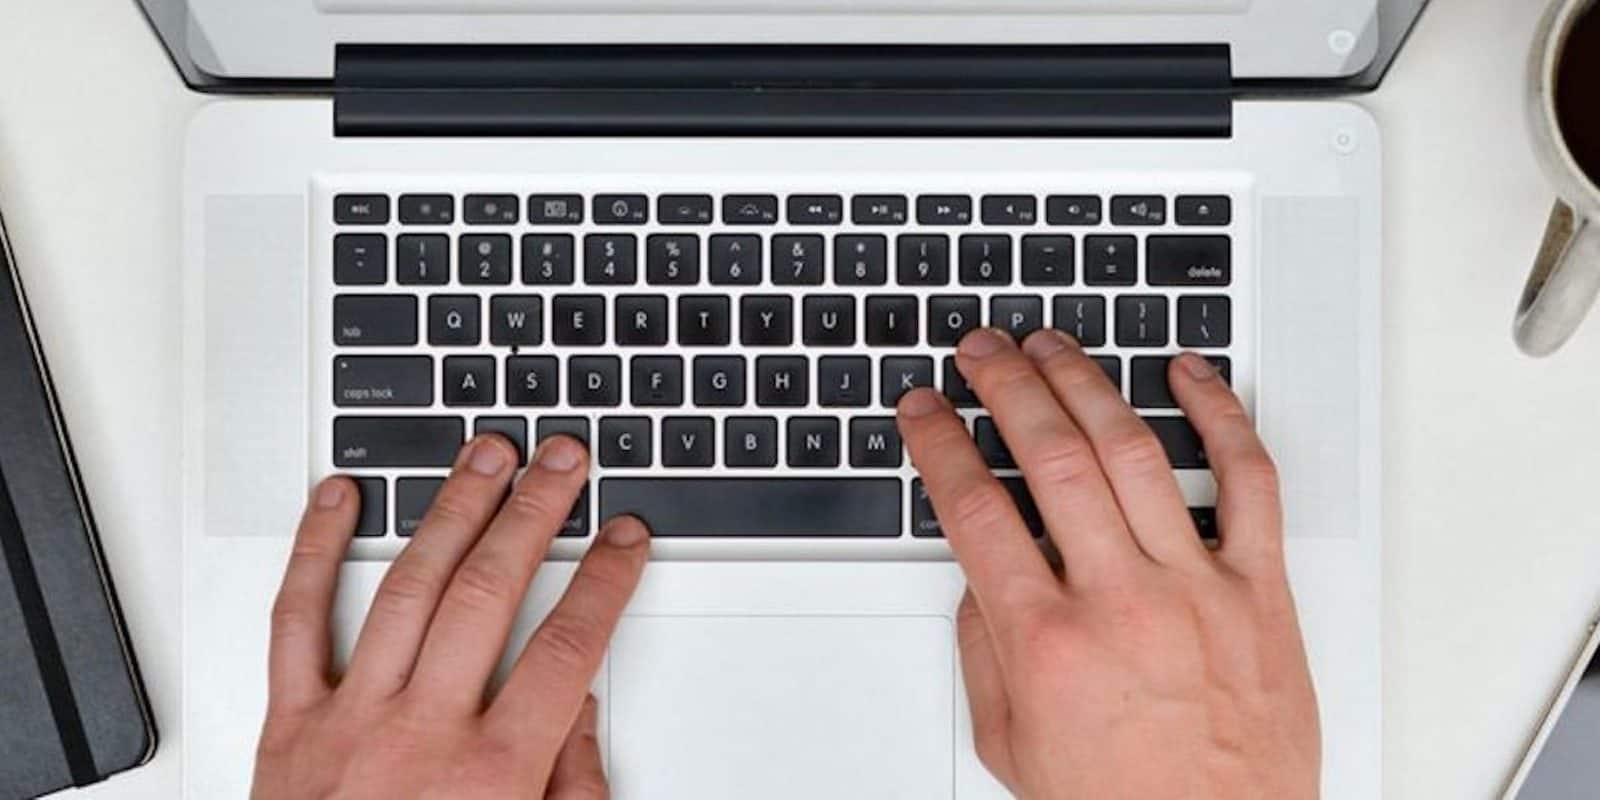 Turn your keyboard into a consistent source of income by becoming a freelance copywriter.